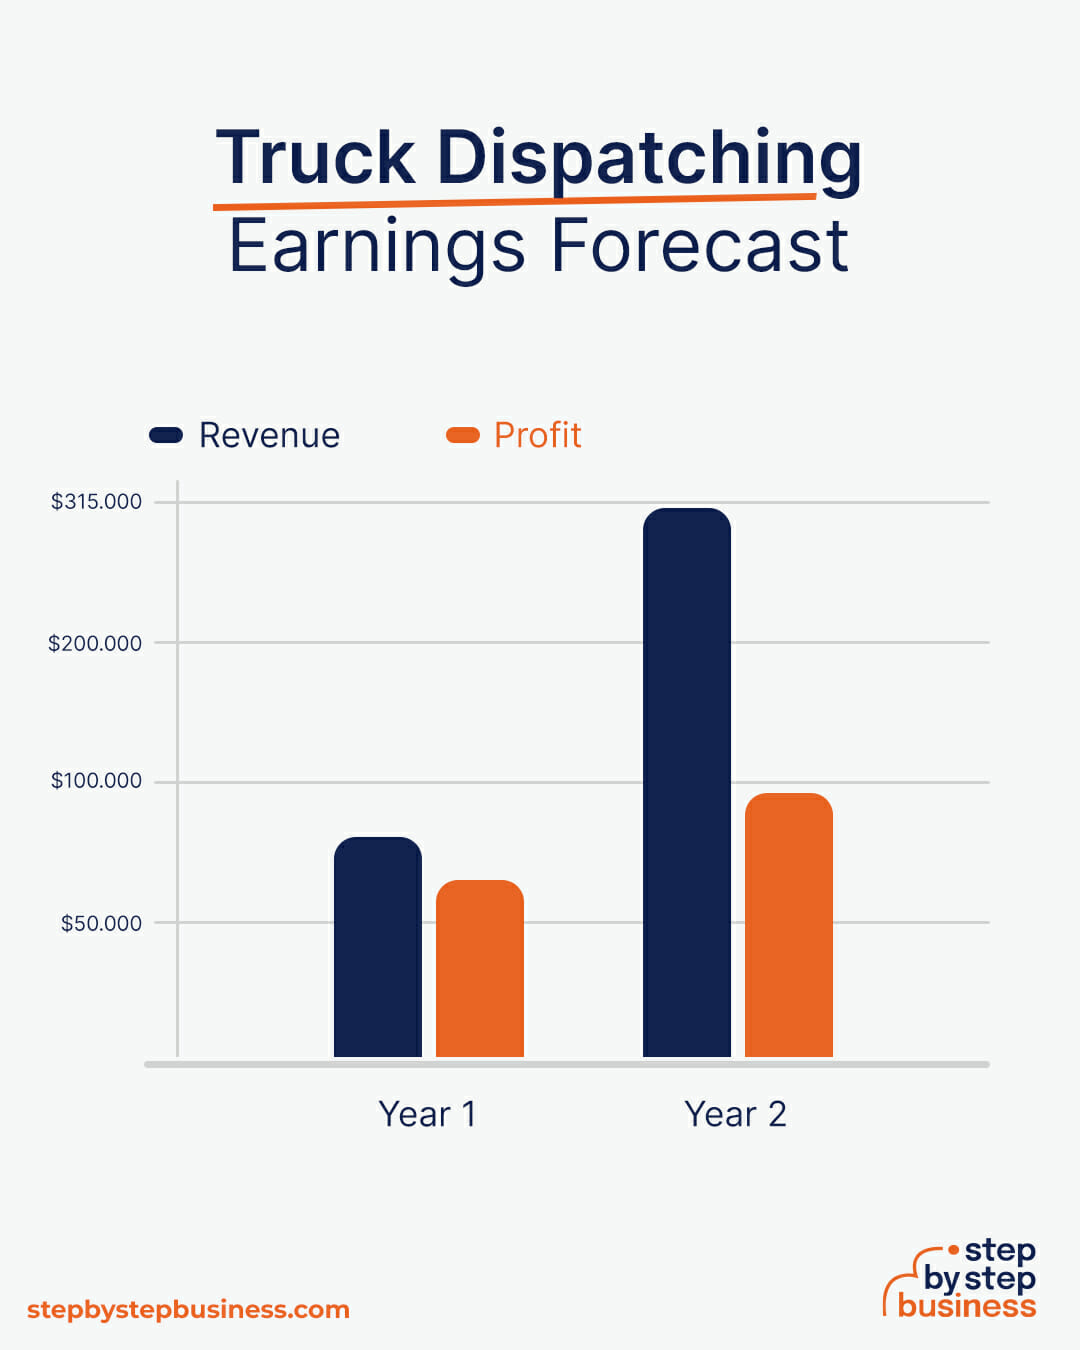 Truck Dispatching Business earning forecast